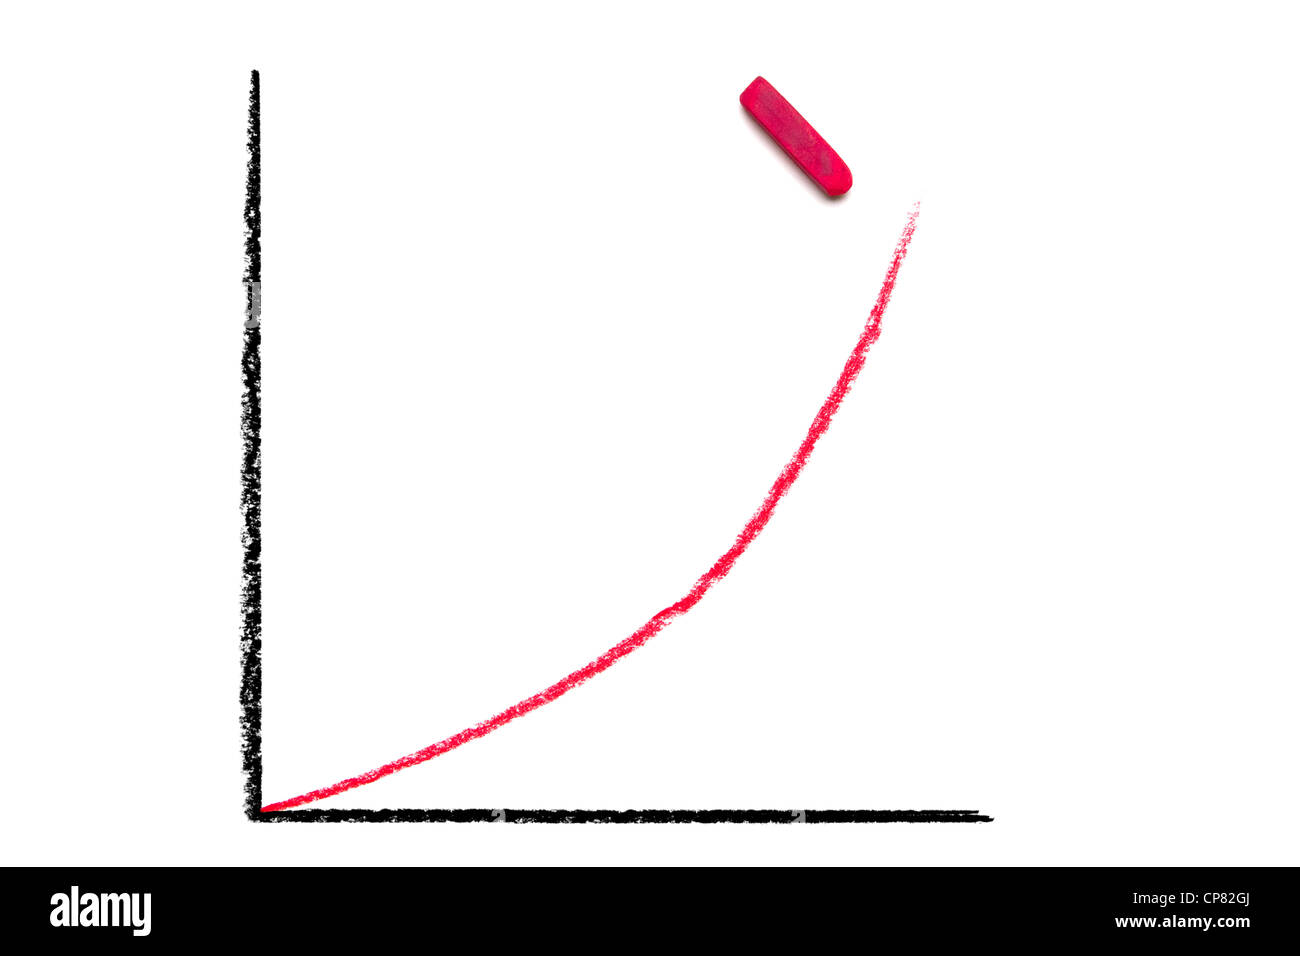 Hand drawn pastel chalk graph with black axes and red line curving upward. Piece of red pastel chalk shown. Isolated on white. Stock Photo